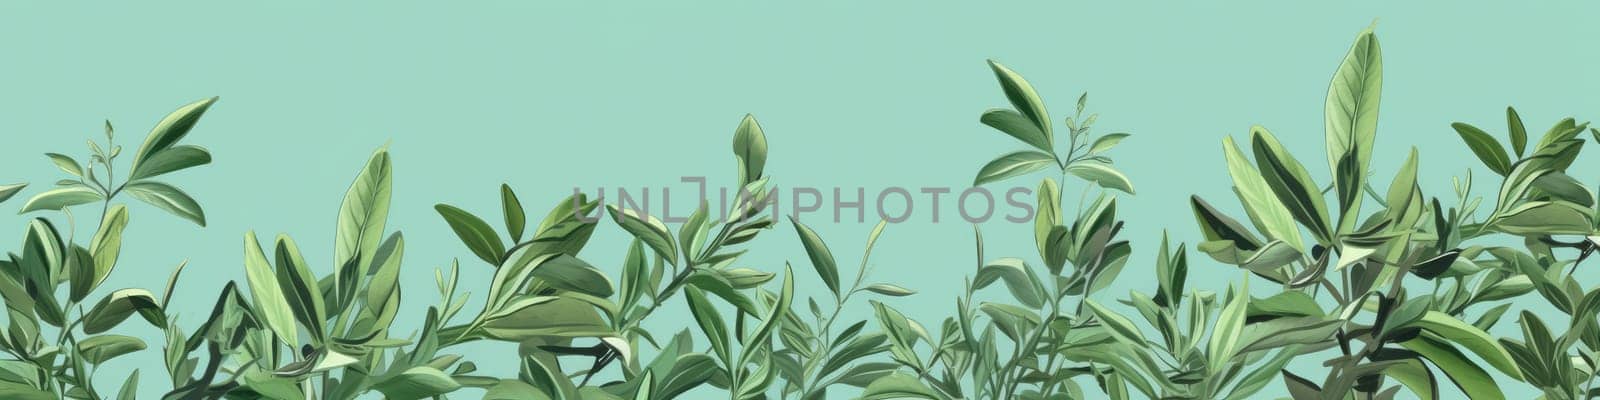 Sage herb on the light green background as banner, herbalism concept by Kadula